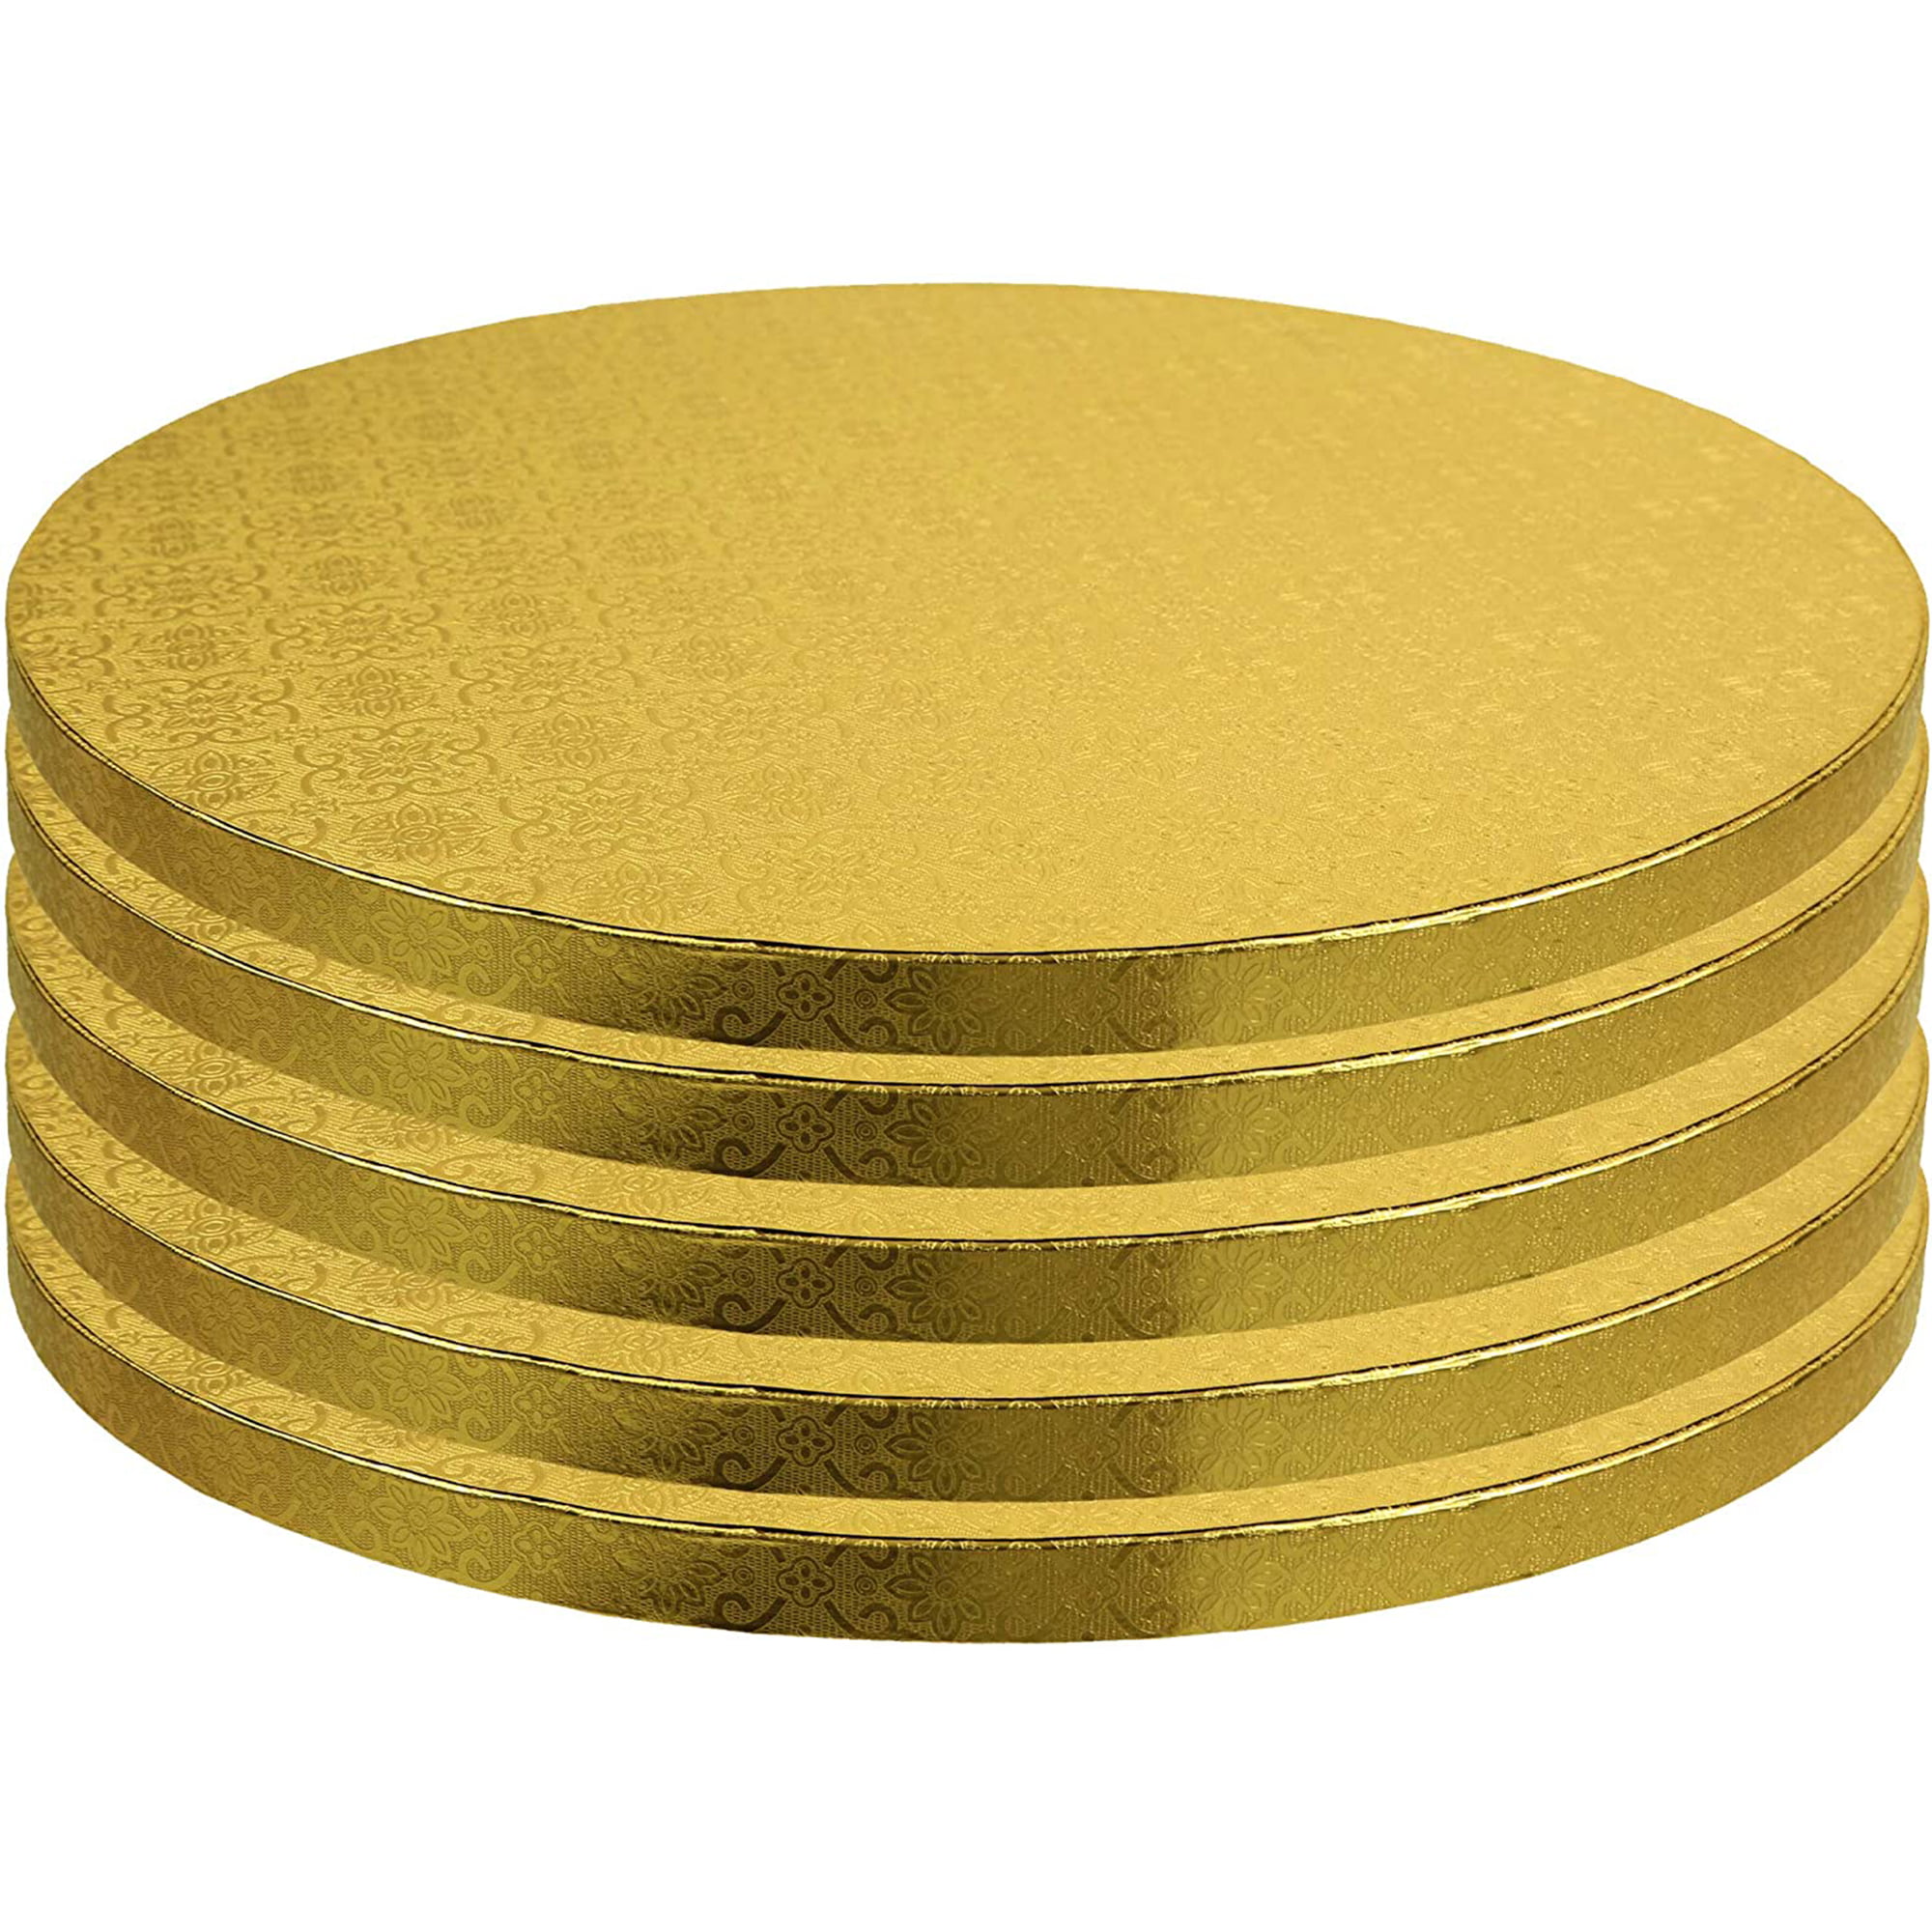 Laminated Rectangular Quarter... Details about   17 Pack 14x10 Inch Gold Corrugated Cake Board 